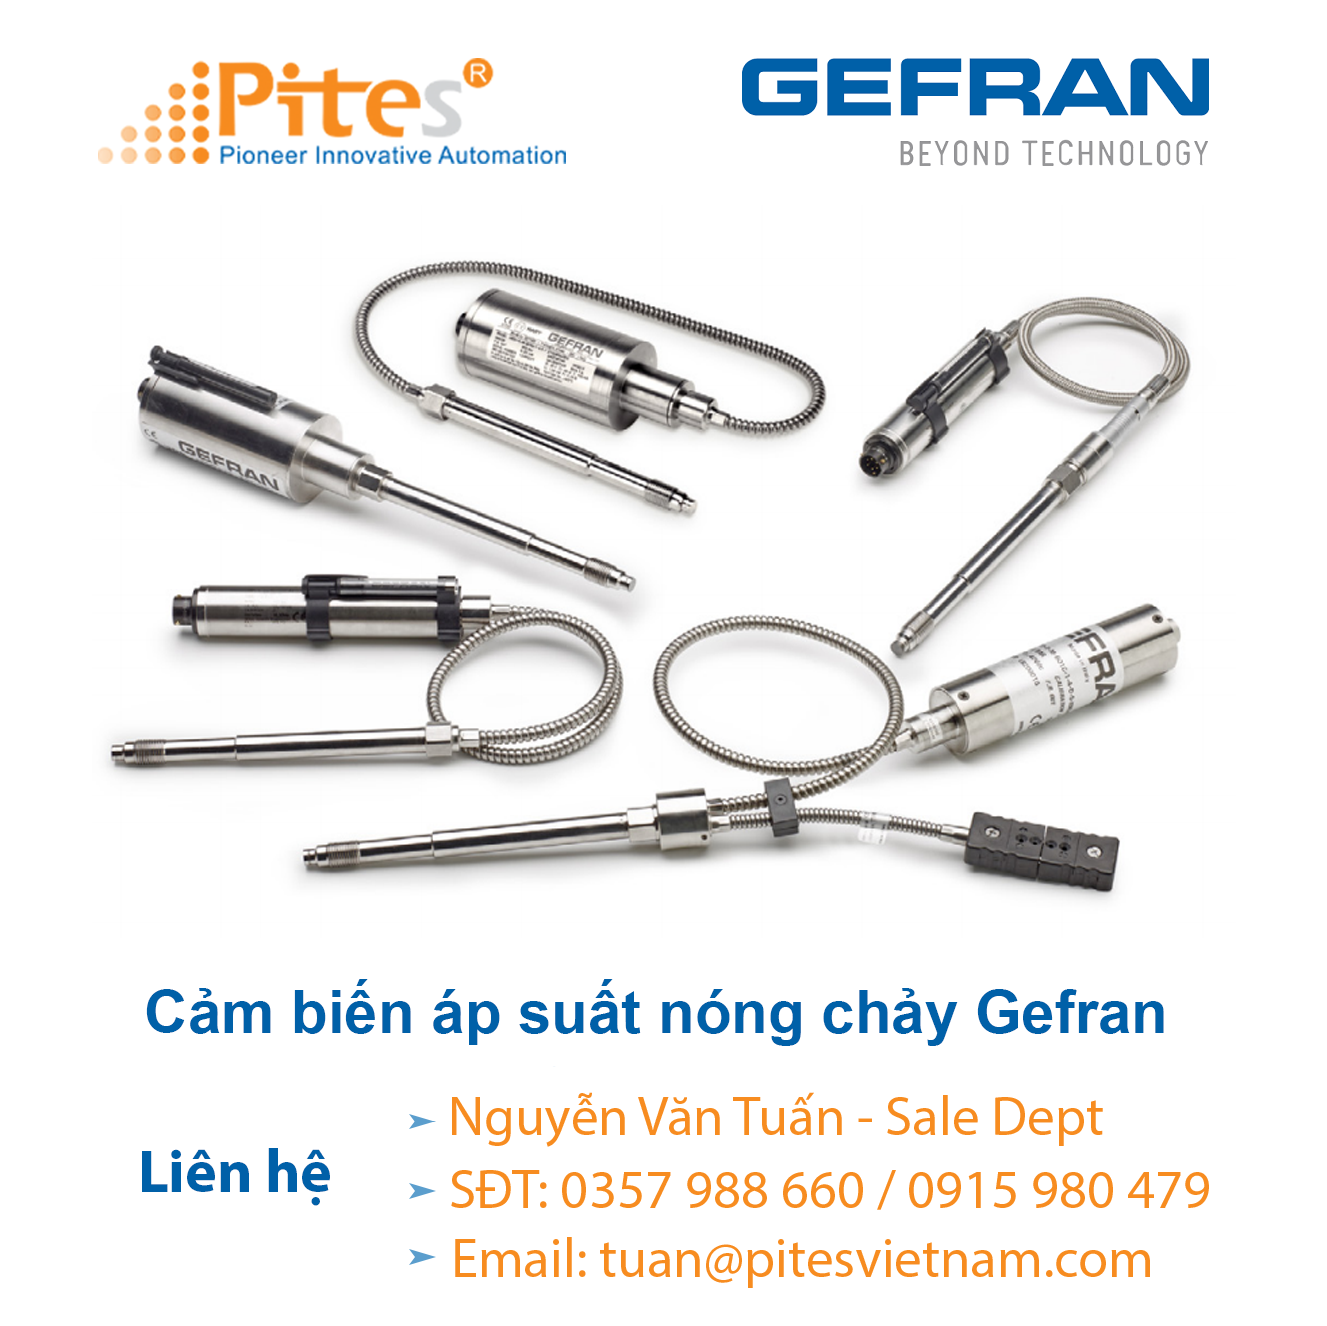 cam-bien-ap-suat-nong-chay-gefran-me1-6-m-b05c-1-4-d-2130x000x00.png